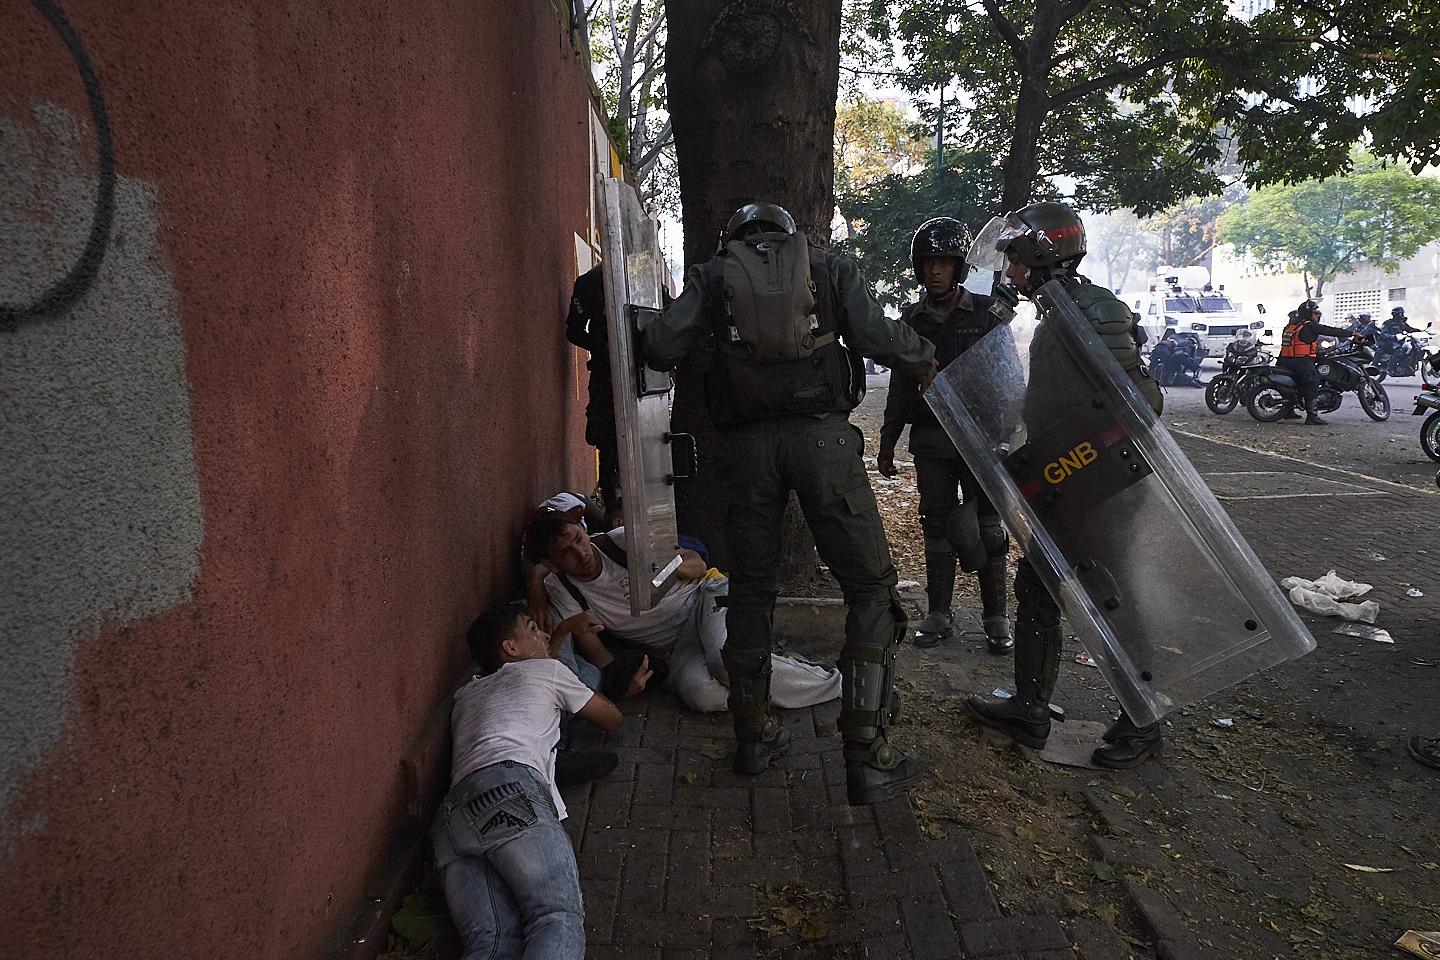 May 1st 2019. Venezuelan government cracks down on protesters.